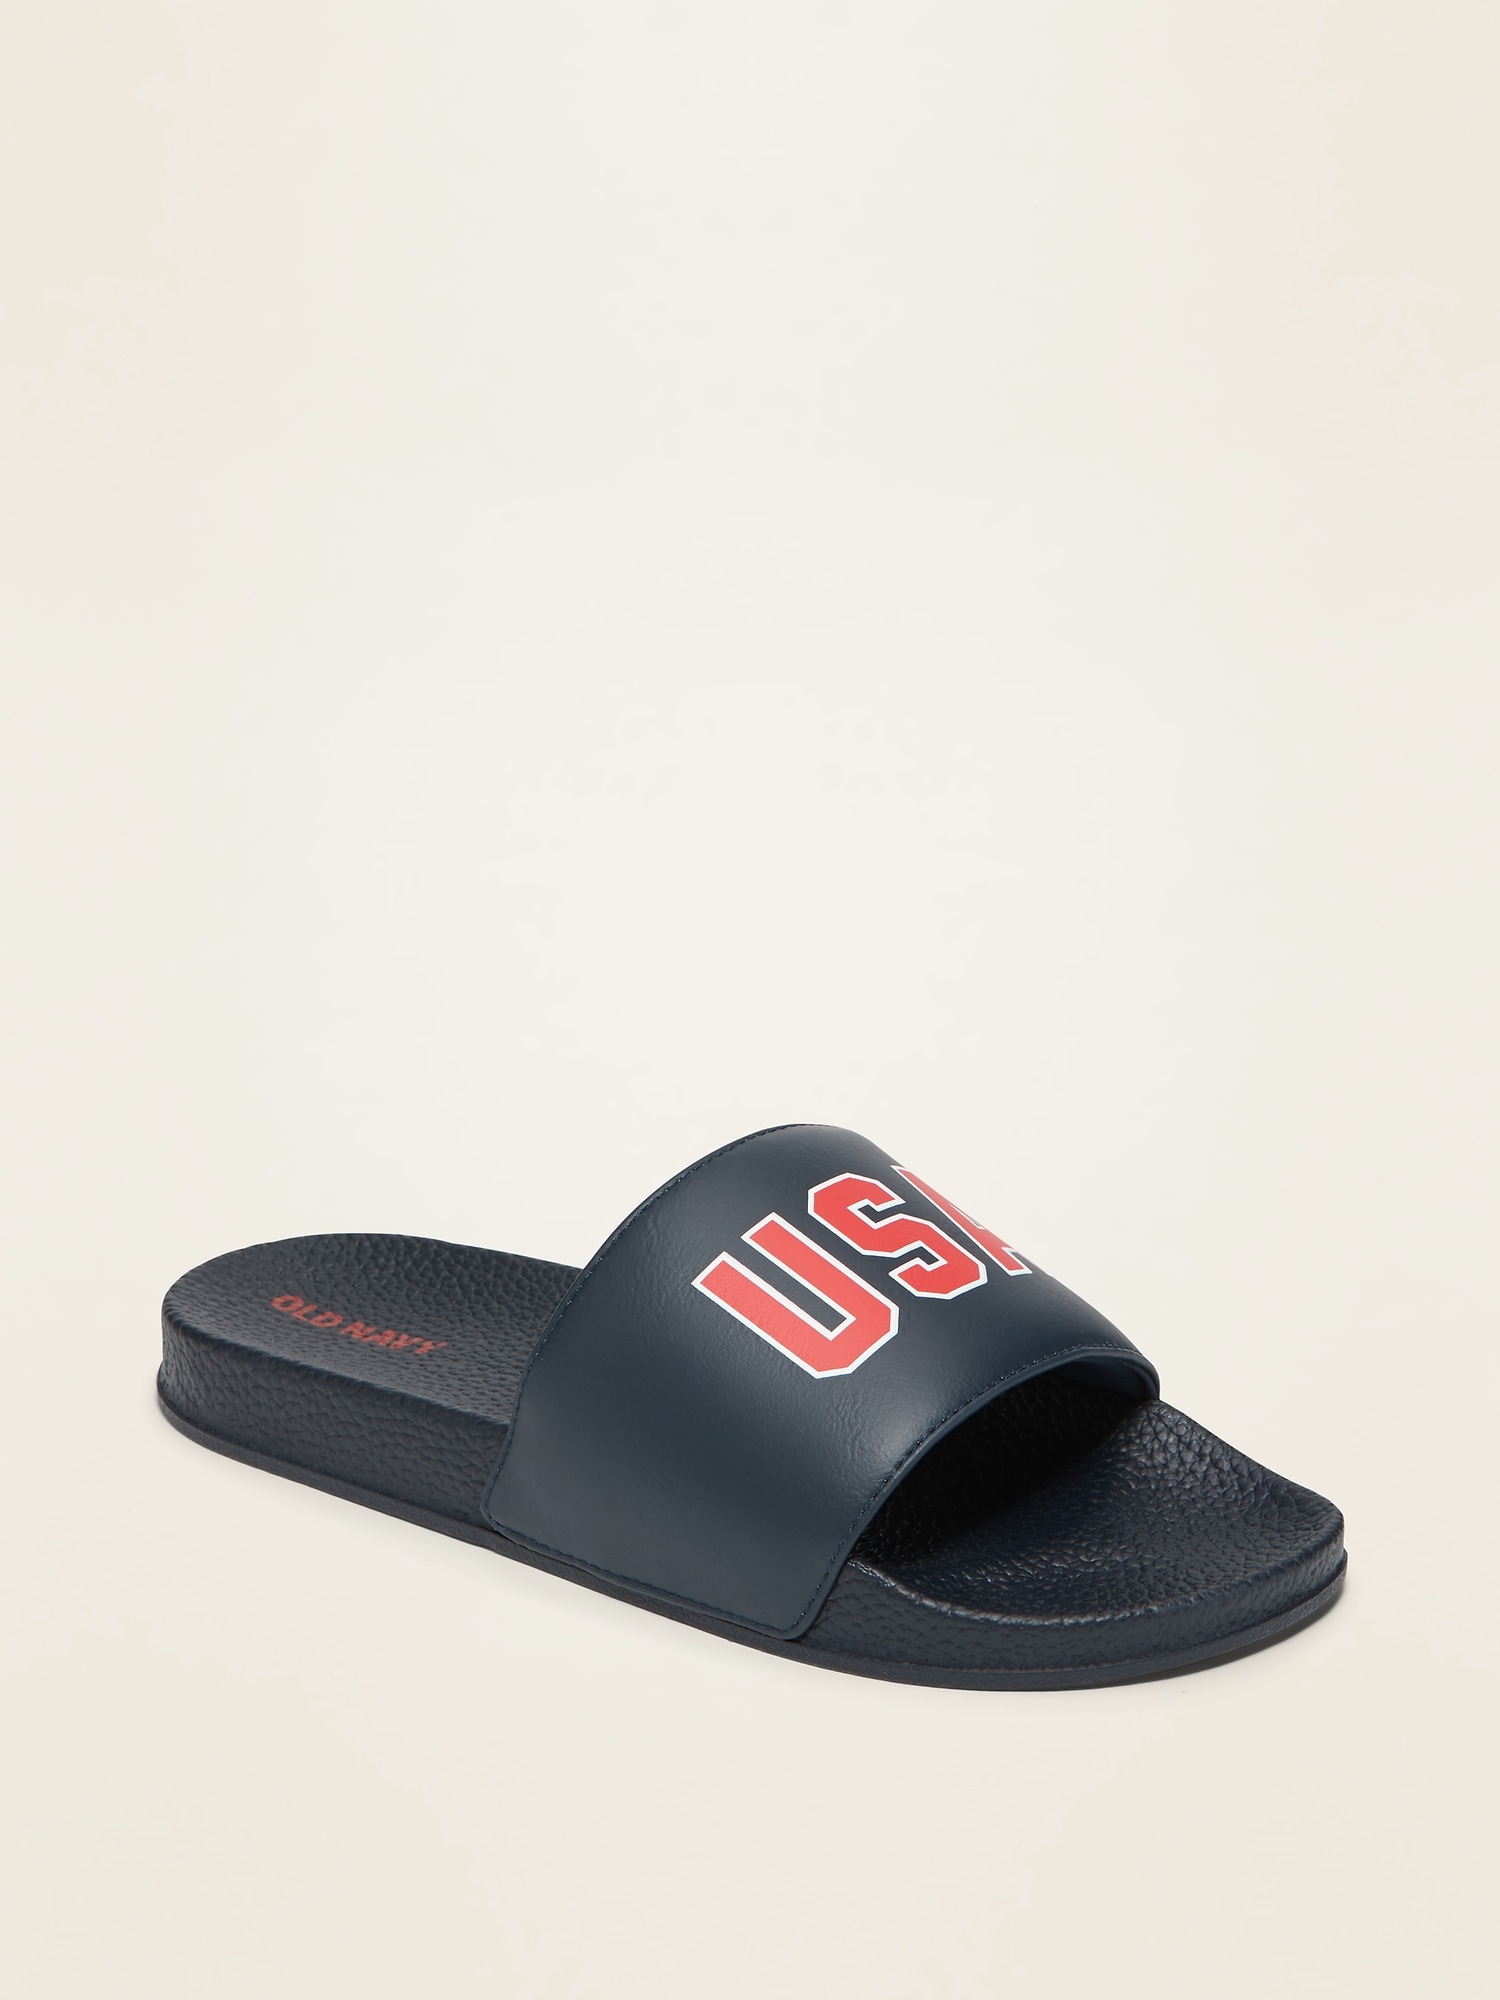 Faux-Leather Pool Slide Sandals for Boys